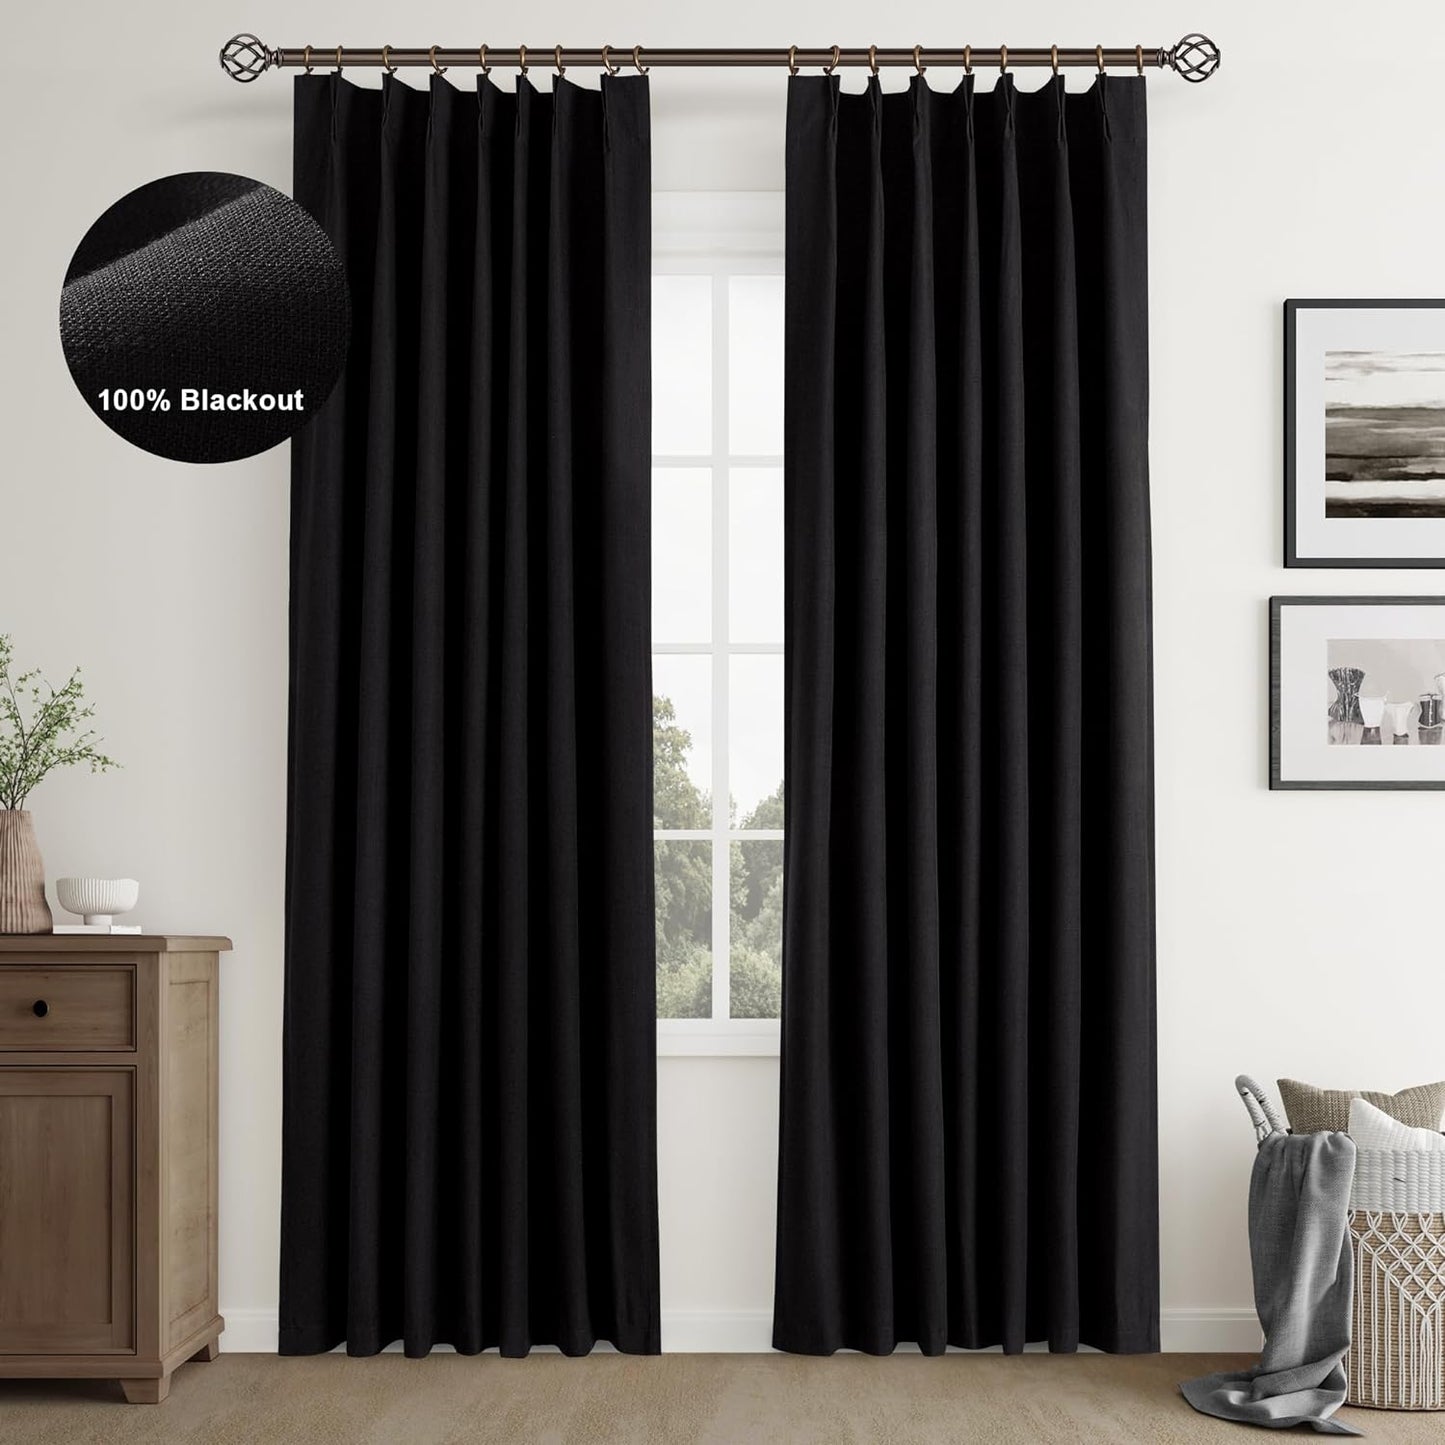 Joywell Cream Ivory Linen 100% Blackout Curtains 84 Inches Long,Pinch Pleated Back Tab Drapes with Hooks Light Blocking Thermal Insulated for Bedroom Living Room,W40 X L84,Natural Beige,2 Panels  Joywell Black 40W X 84L Inch X 2 Panels 